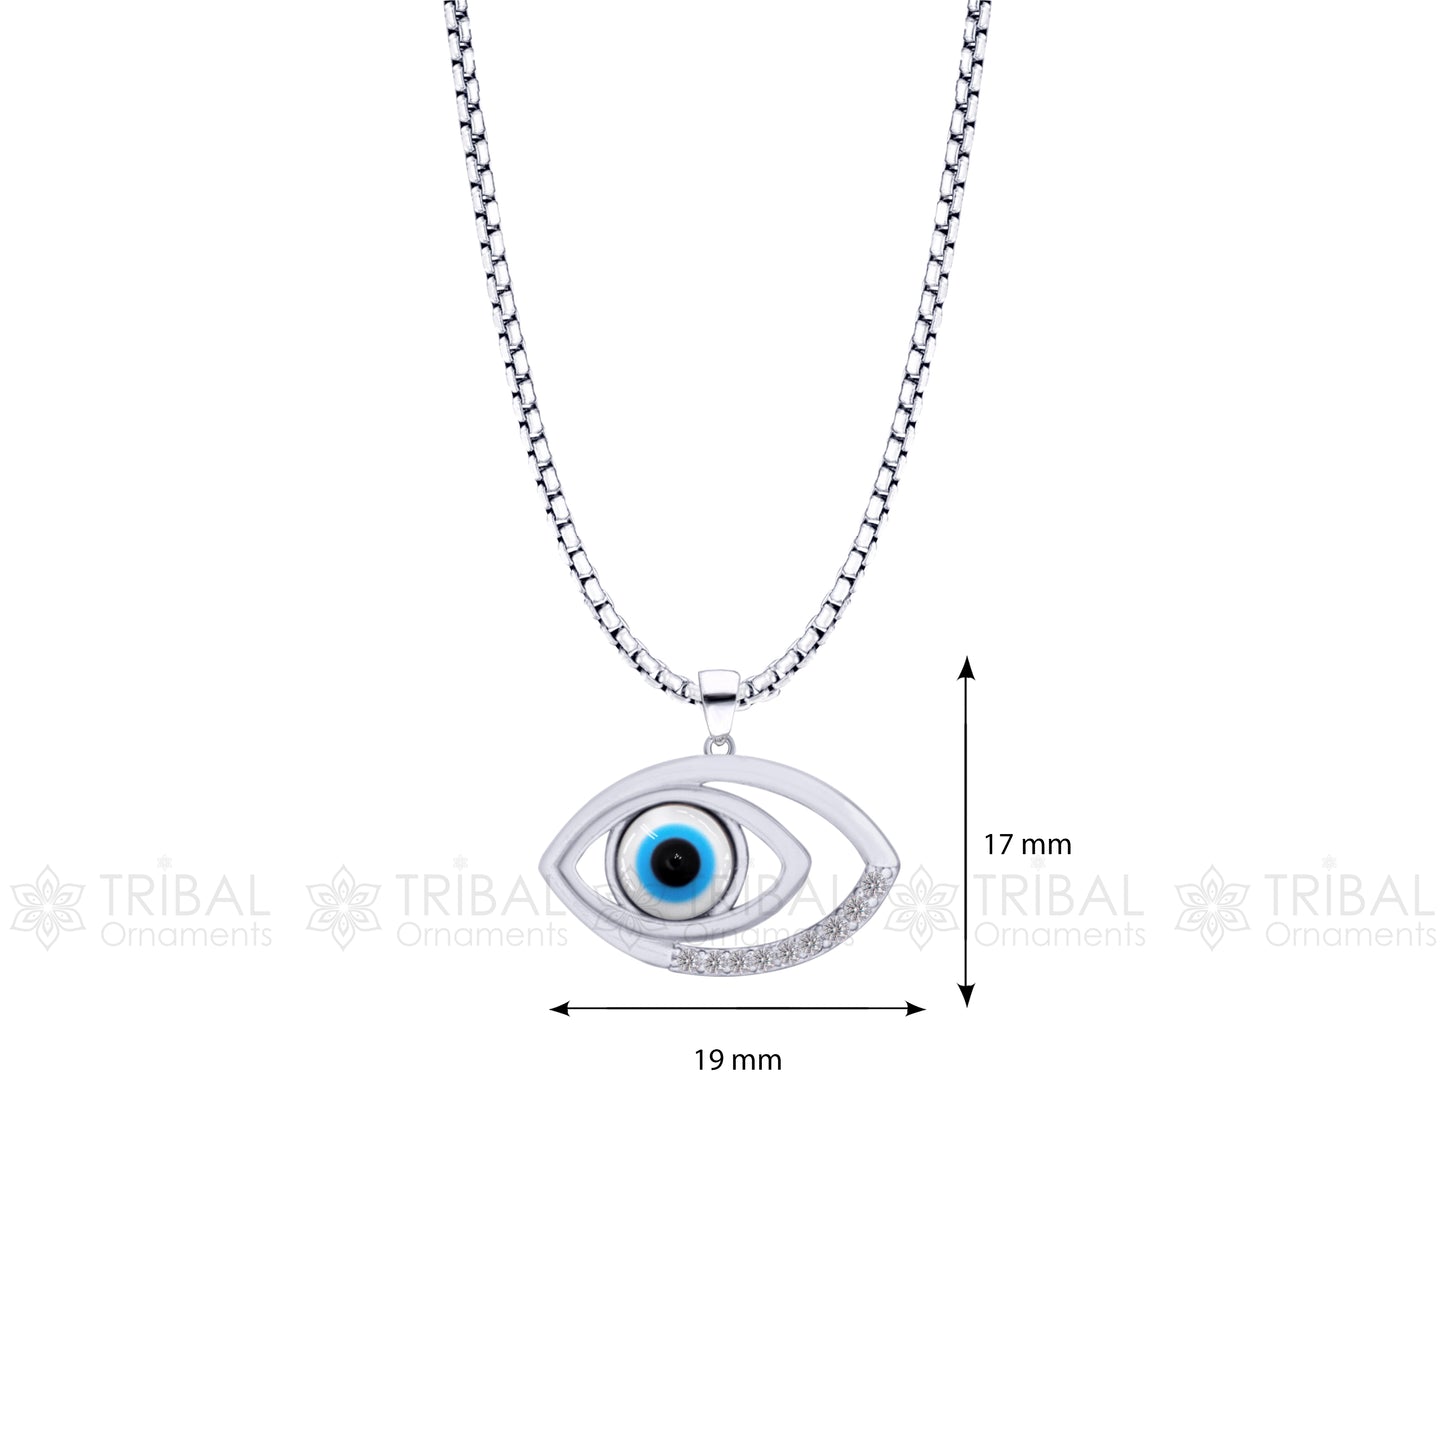 PURE 925 sterling silver evil eyes pendant with CZ stone nsp794